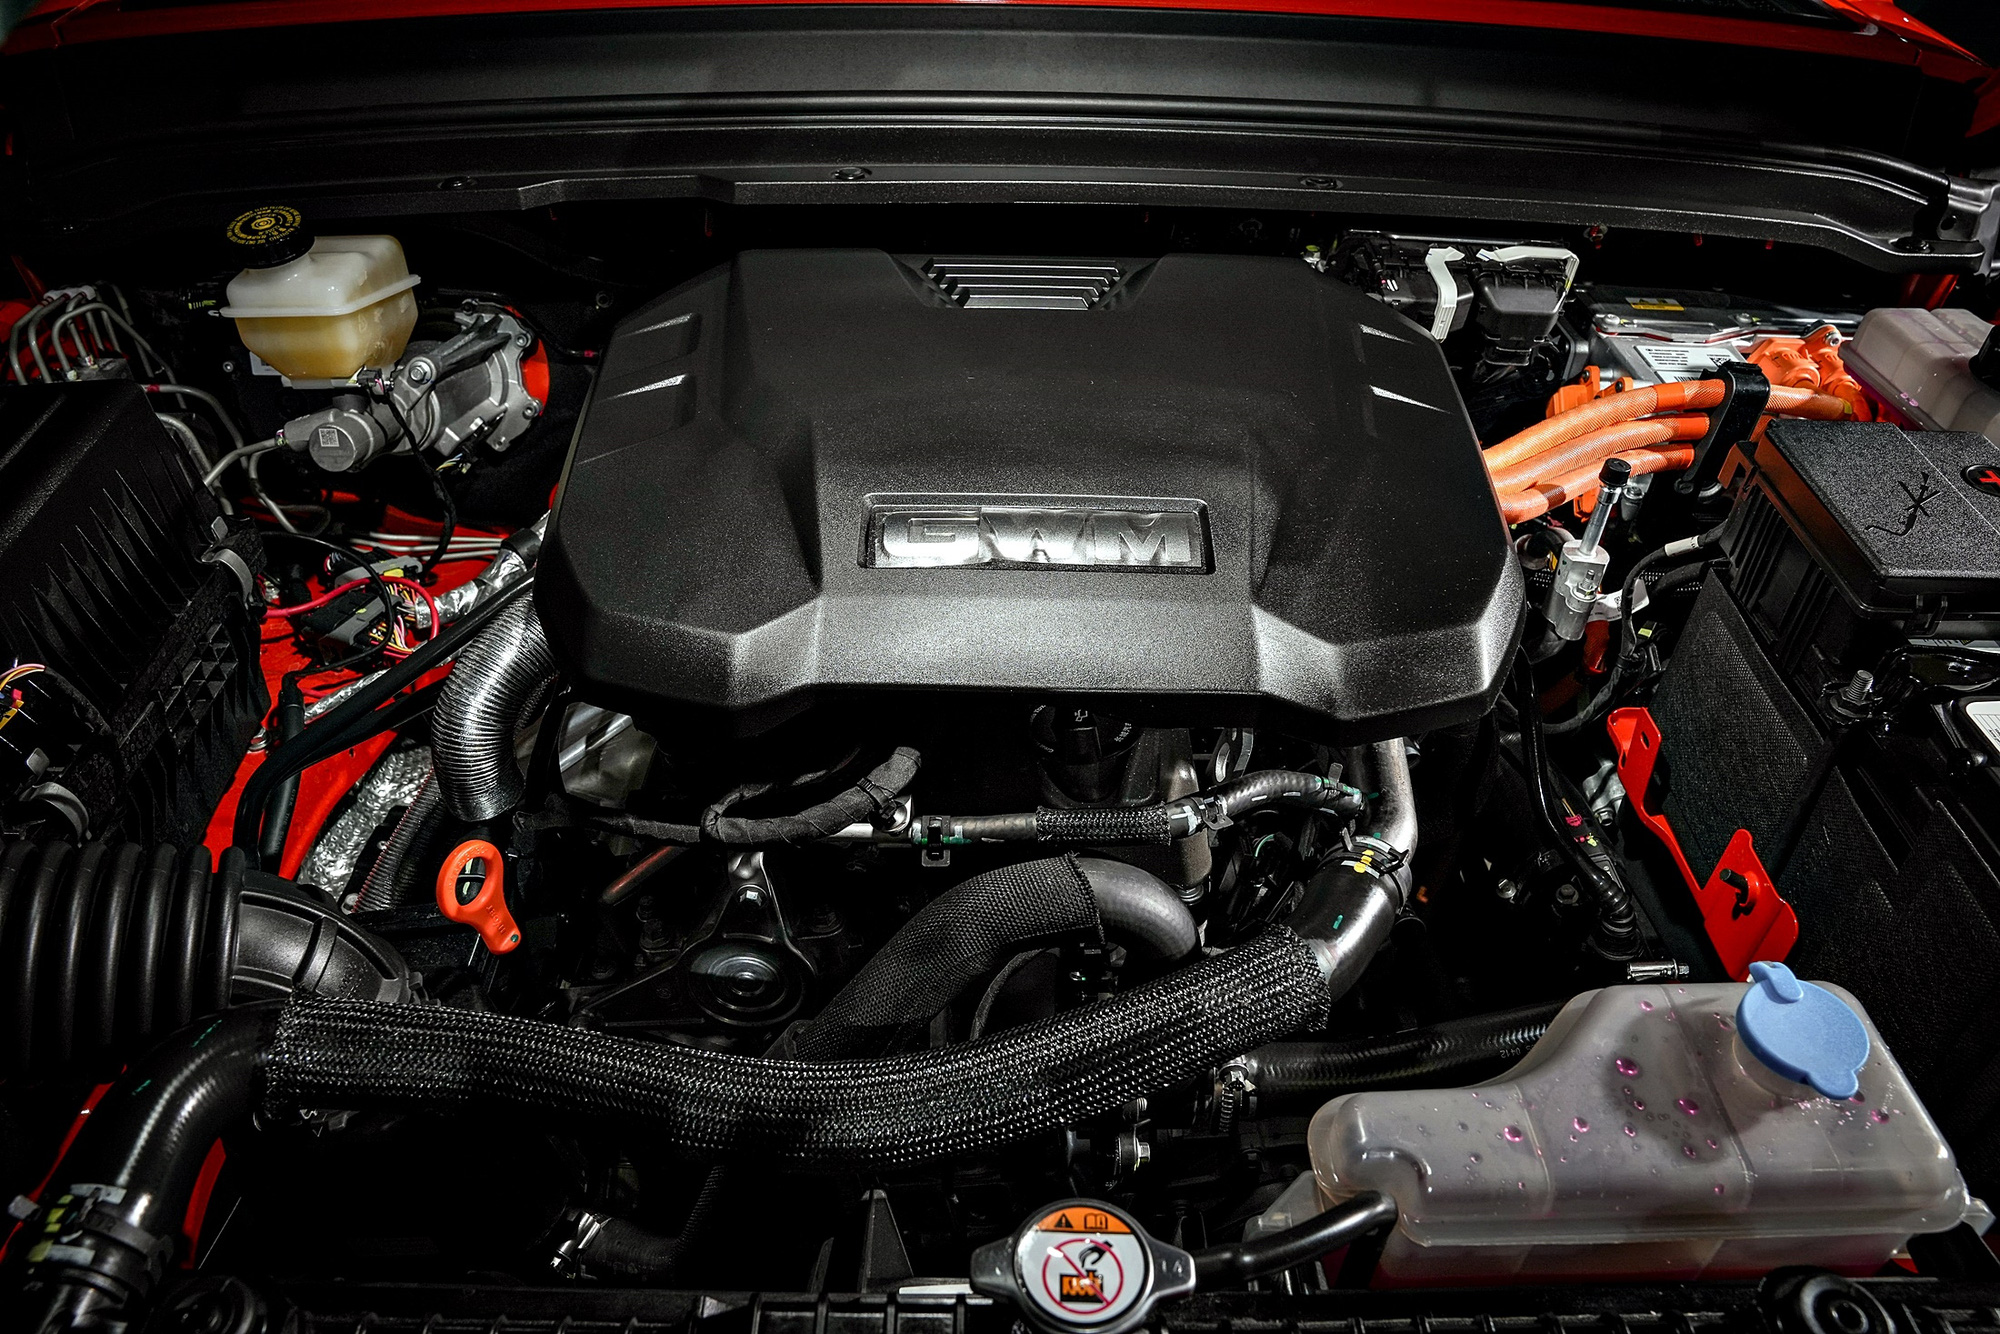 The engine is a hybrid type. Photo: Autoinfo